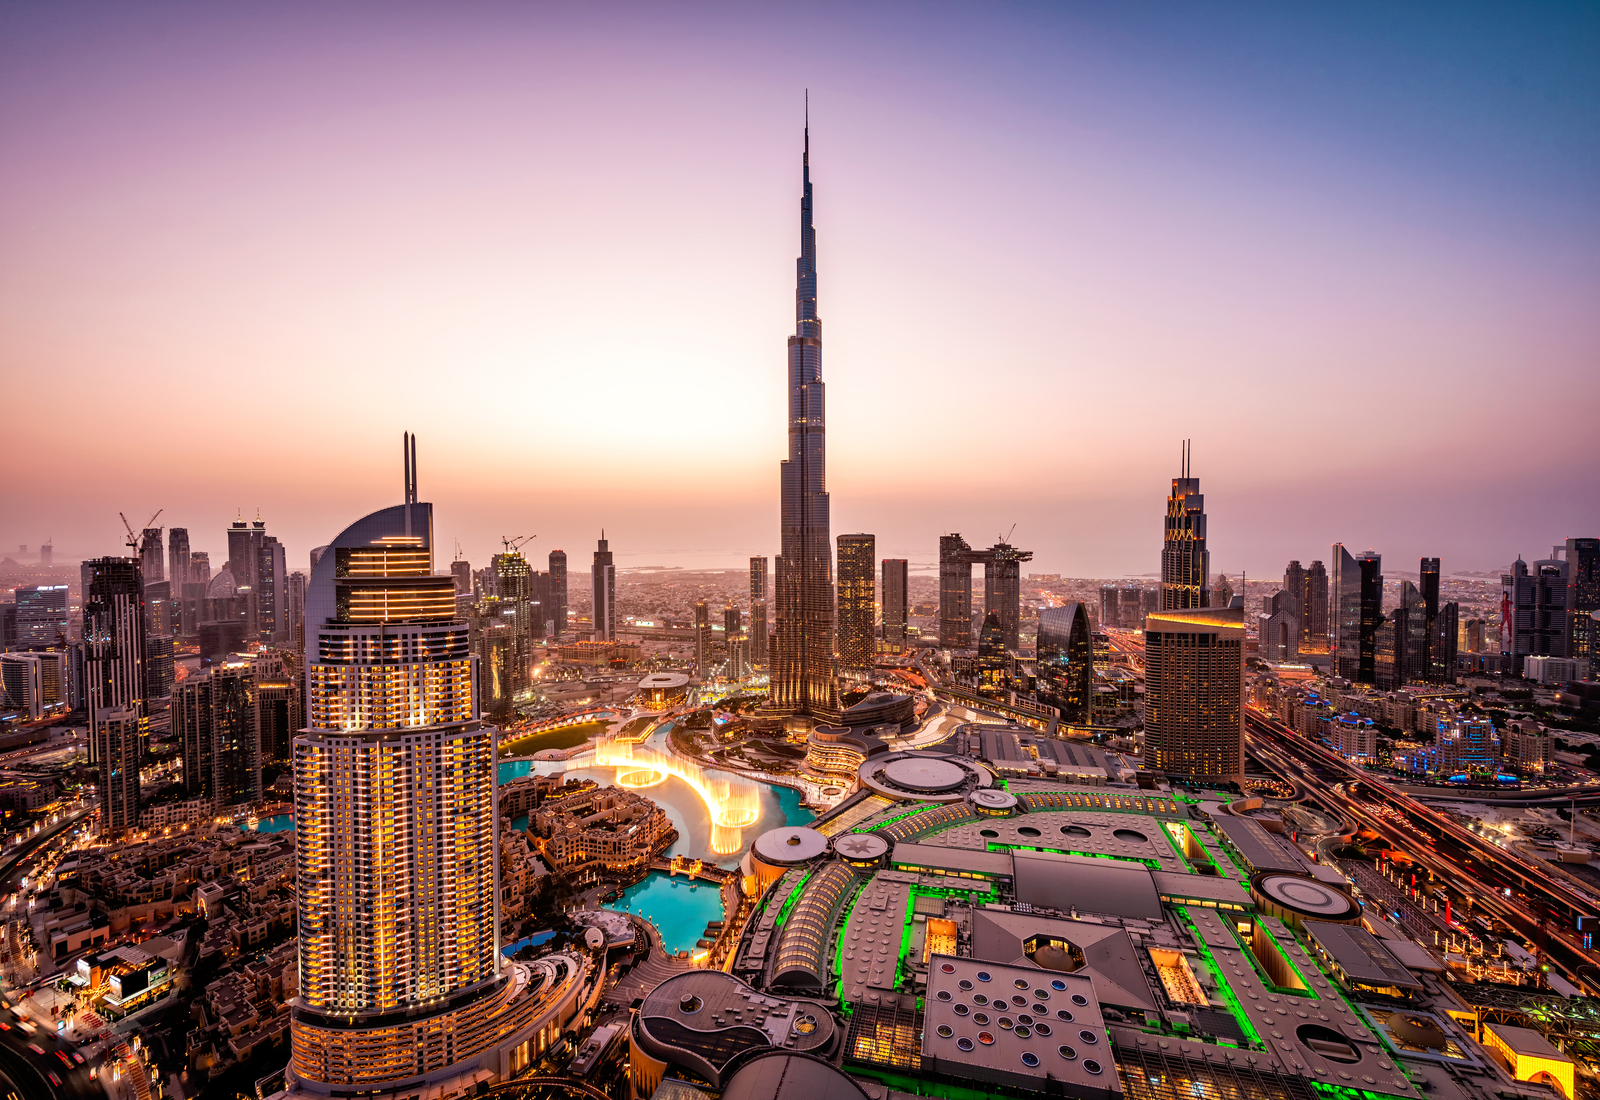 ZAKA Search and Rescue enters international aid collaboration agreement with counterparts in United Arab Emirates. Photo of Dubai, by Shutterstock